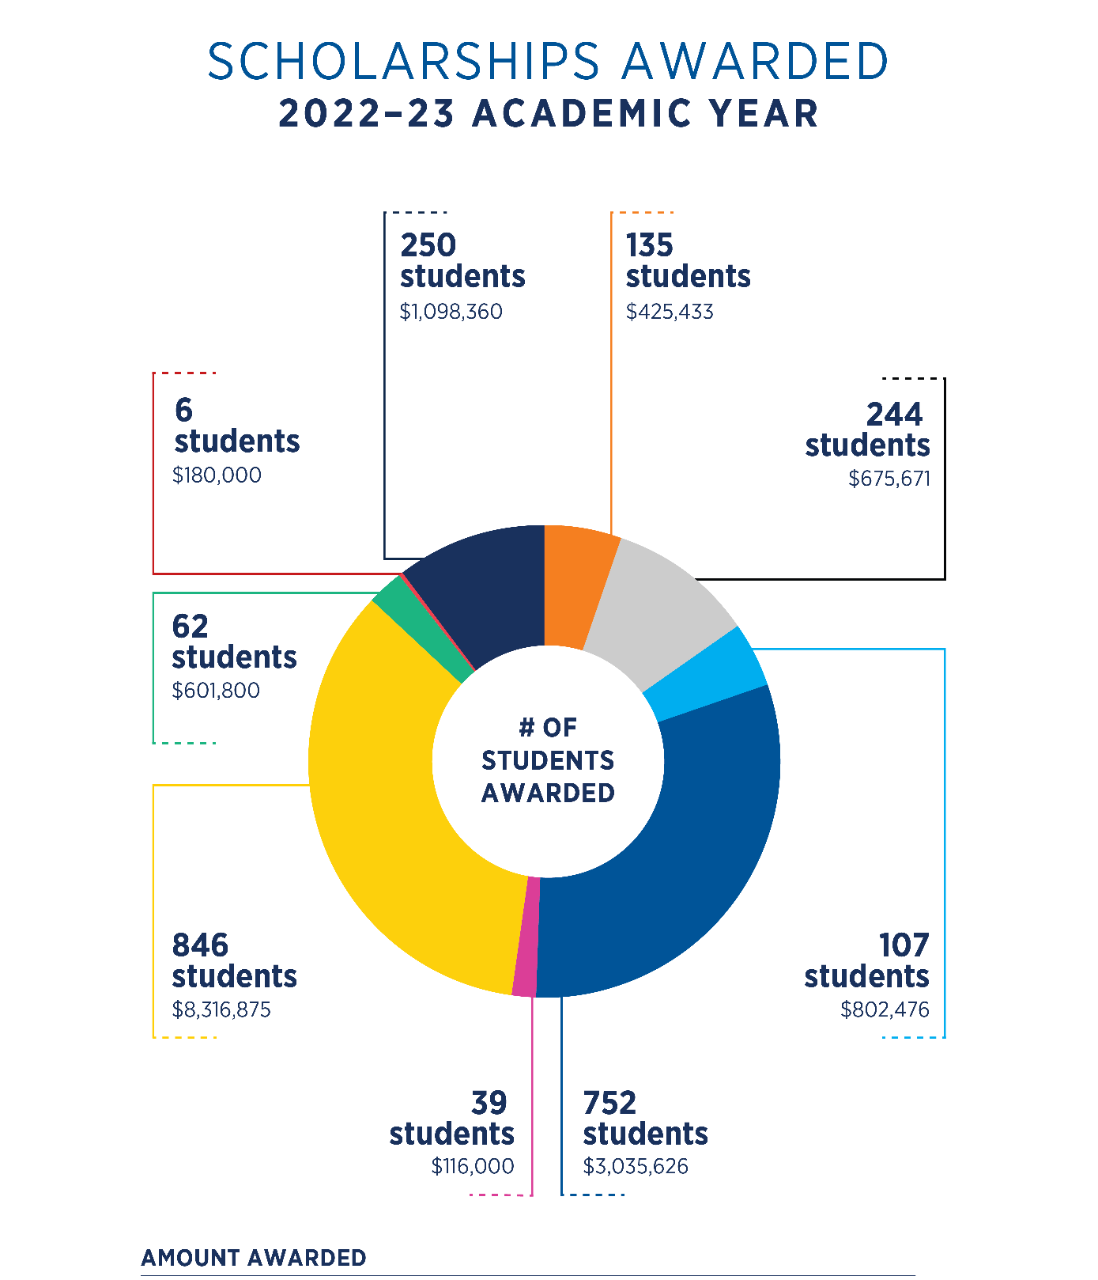 Number of students awarded scholarships in 2021 - 2022 academic year. Pie graph shows 732 for four-year renewable scholarships, 769 for returning student scholarships, 189 for study-abroad scholarships, 101 for internship scholarships, 281 for spring / summer scholarships, 87 for CSP summer bridge scholarships, and 78 for emergency scholarships